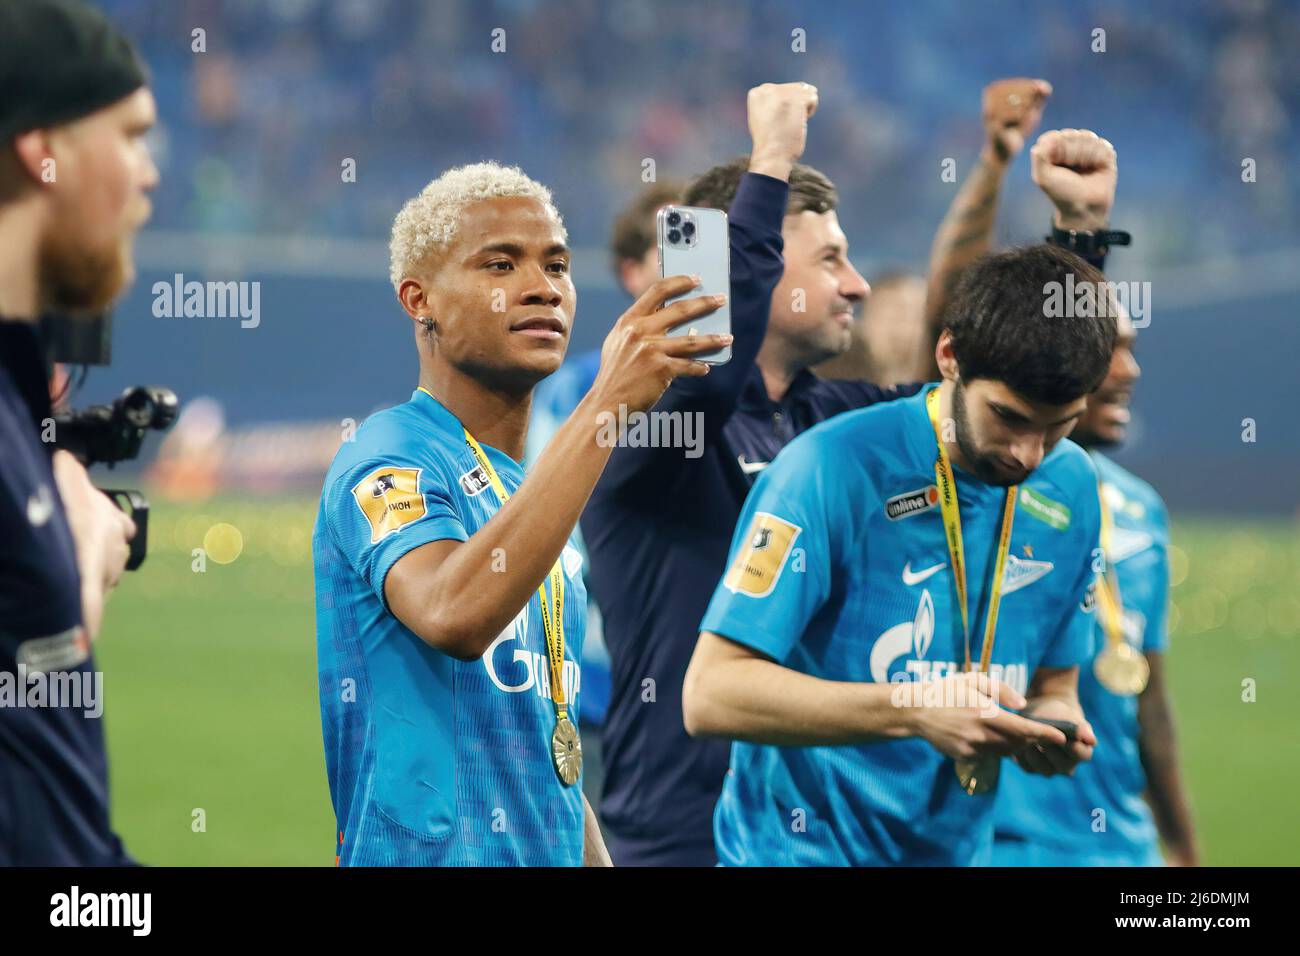 Wilmar Henrique Barrios Teran, commonly known as Wilmar Barrios (No.5) seen during the awarding ceremony of gold medals and the Cup of Champions of Russia to football players of the Zenit football club. Stock Photo